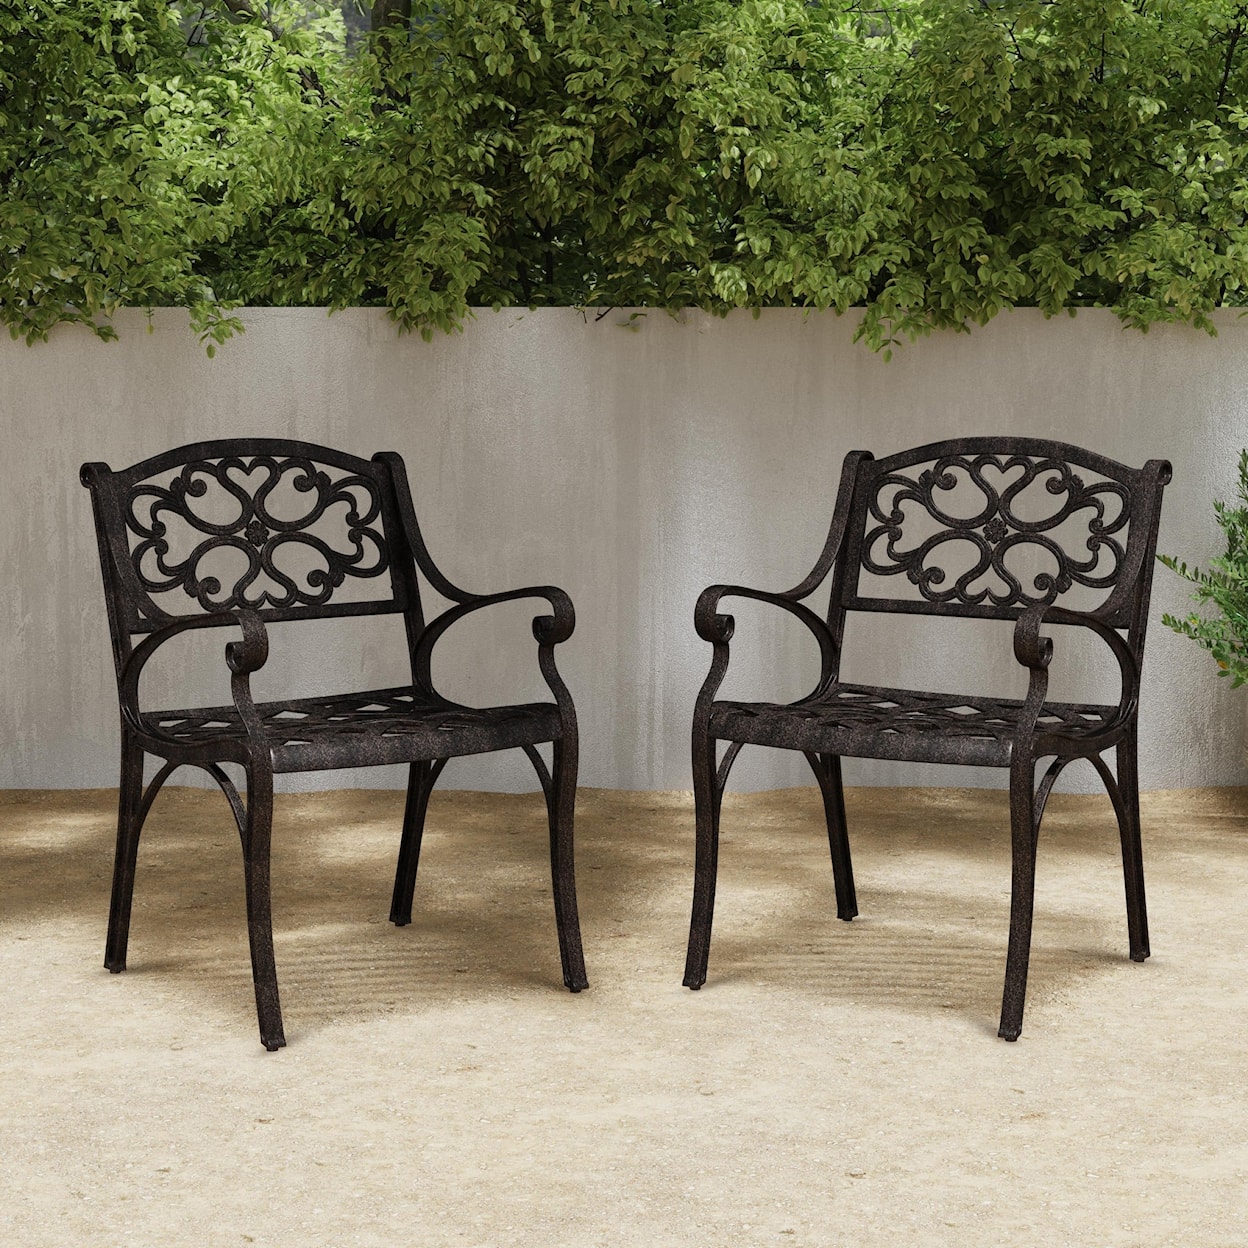 homestyles Sanibel Set of 2 Outdoor Arm Chairs